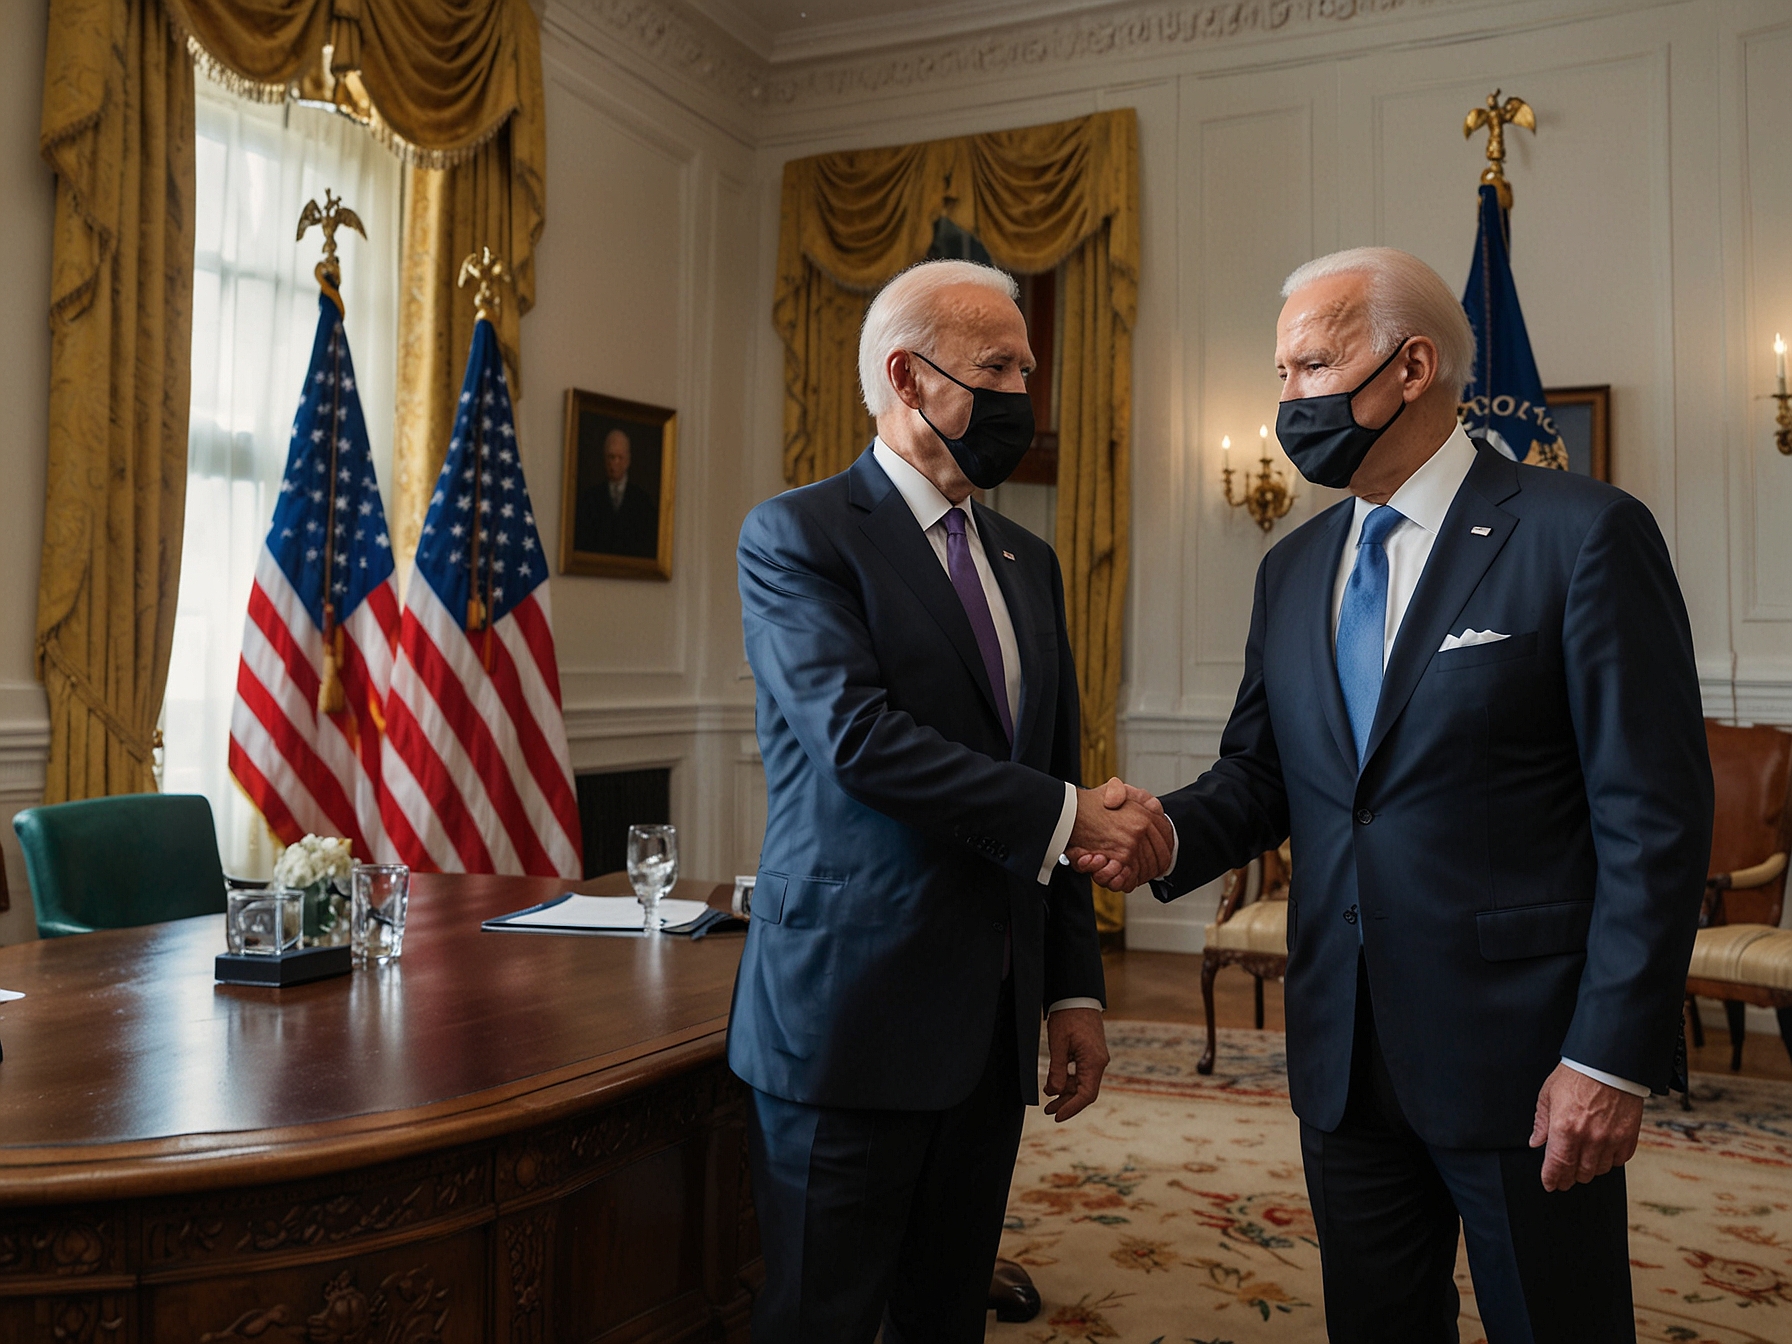 President Biden and NATO Secretary-General Stoltenberg shaking hands in a formal meeting room, symbolizing US commitment and unity within NATO ahead of the crucial Washington summit.